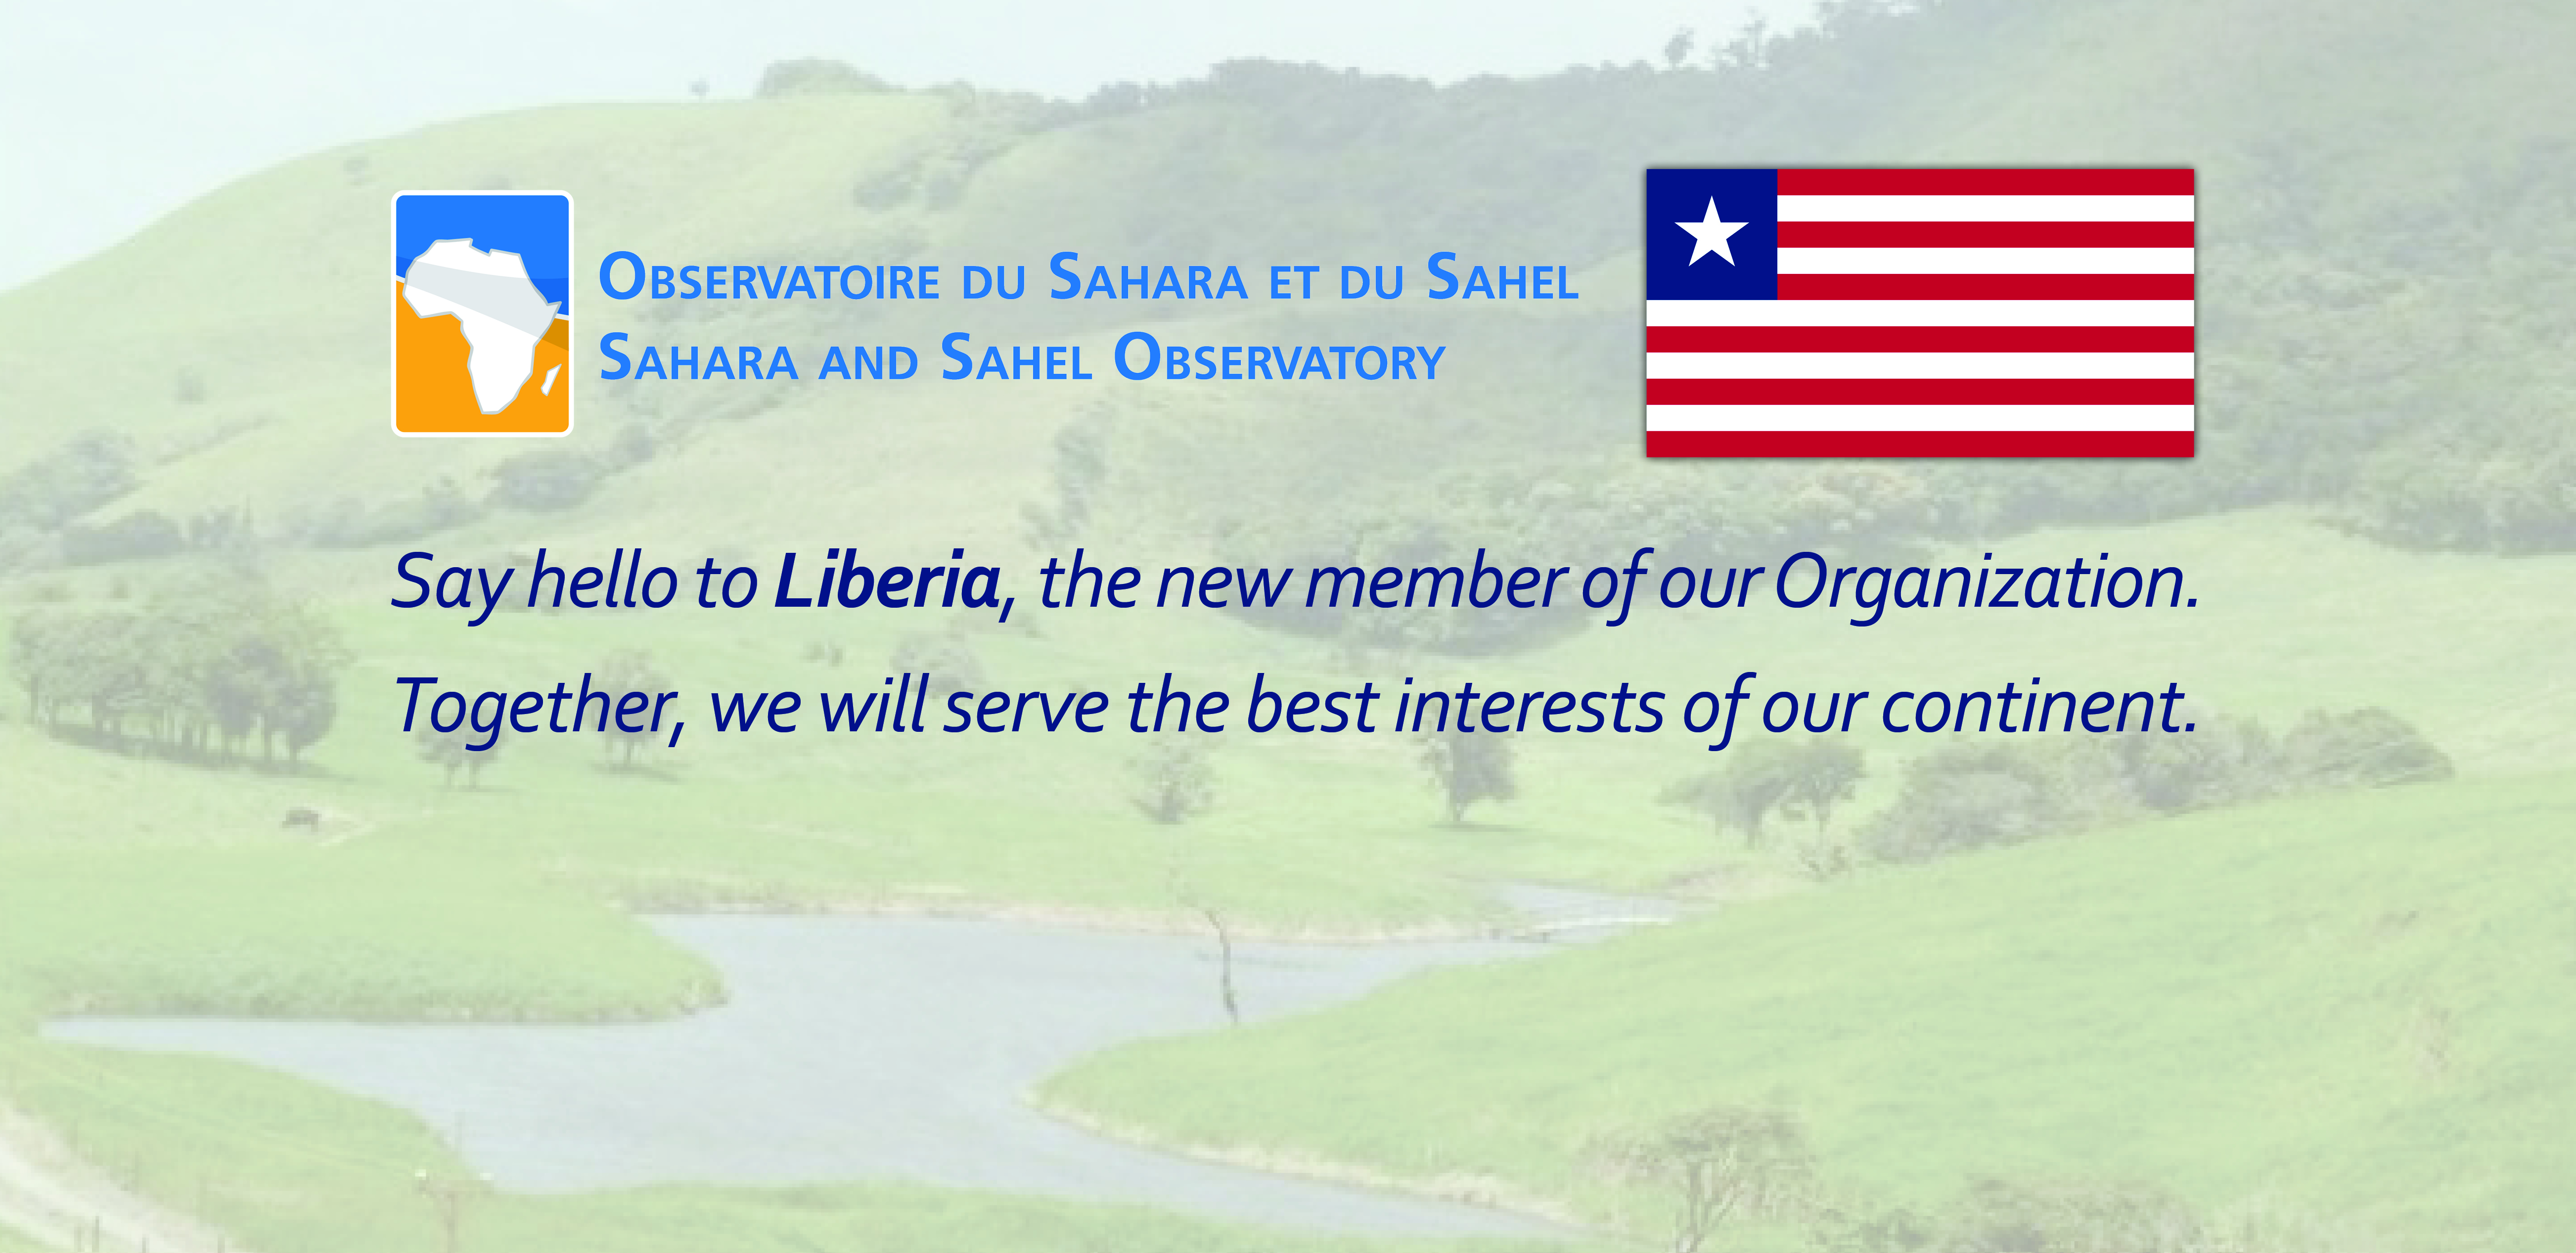  Liberia is officially a member of the Sahara and Sahel Observatory 